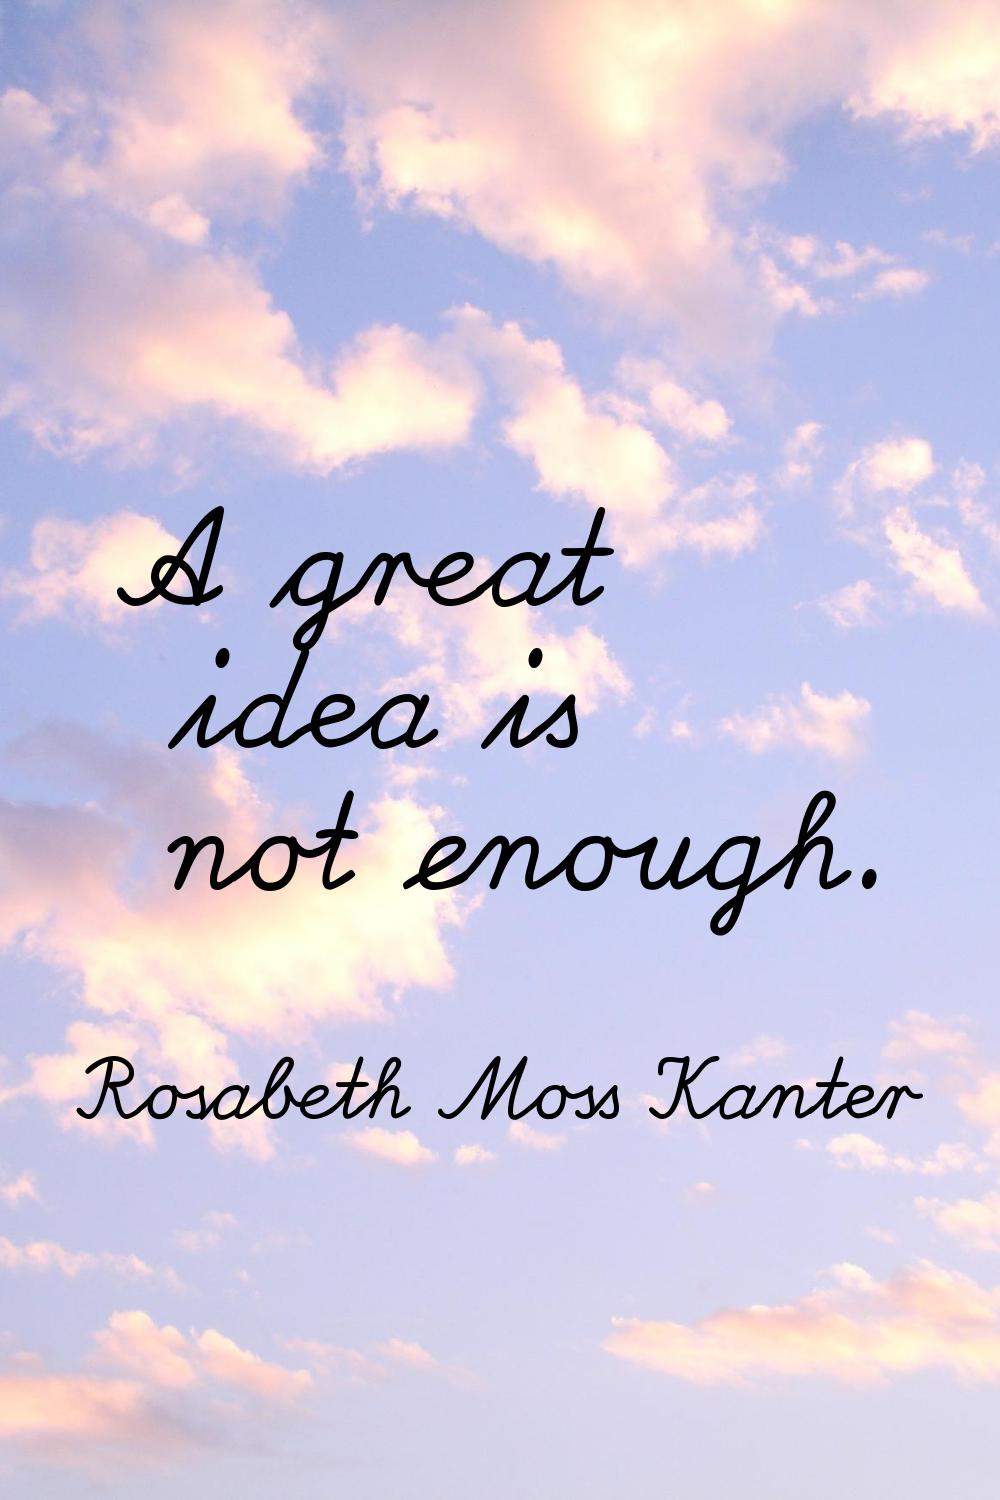 A great idea is not enough.